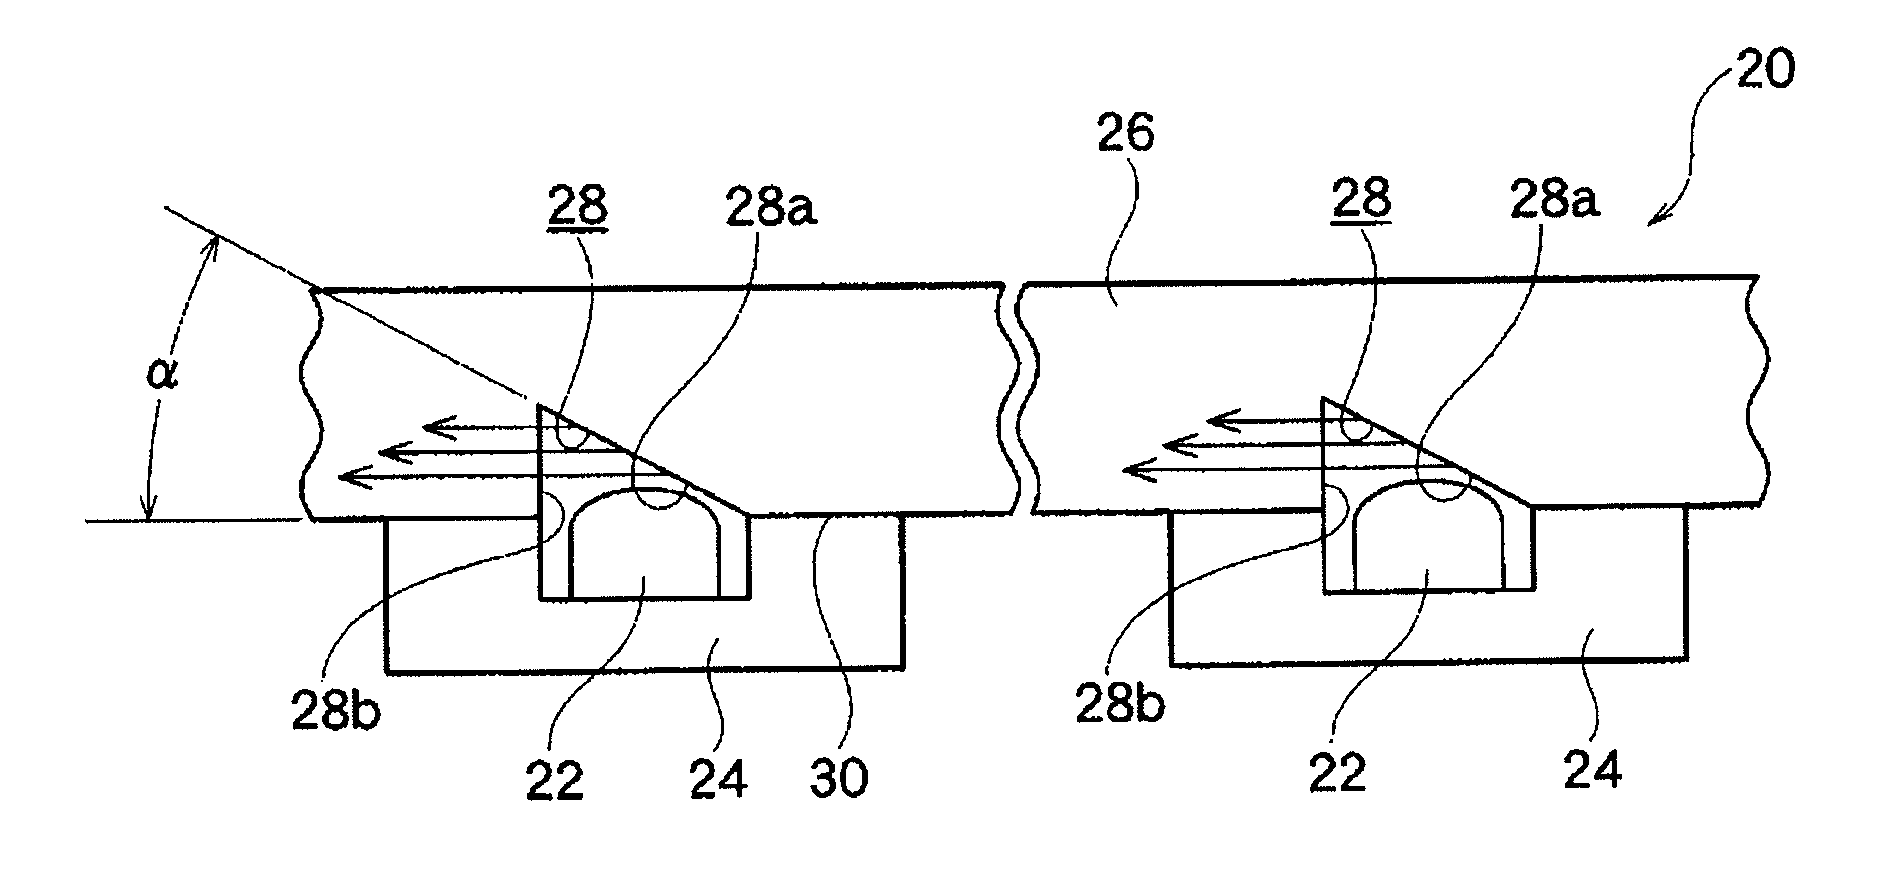 Light guide member, planar light source device using the light guide member, and display apparatus